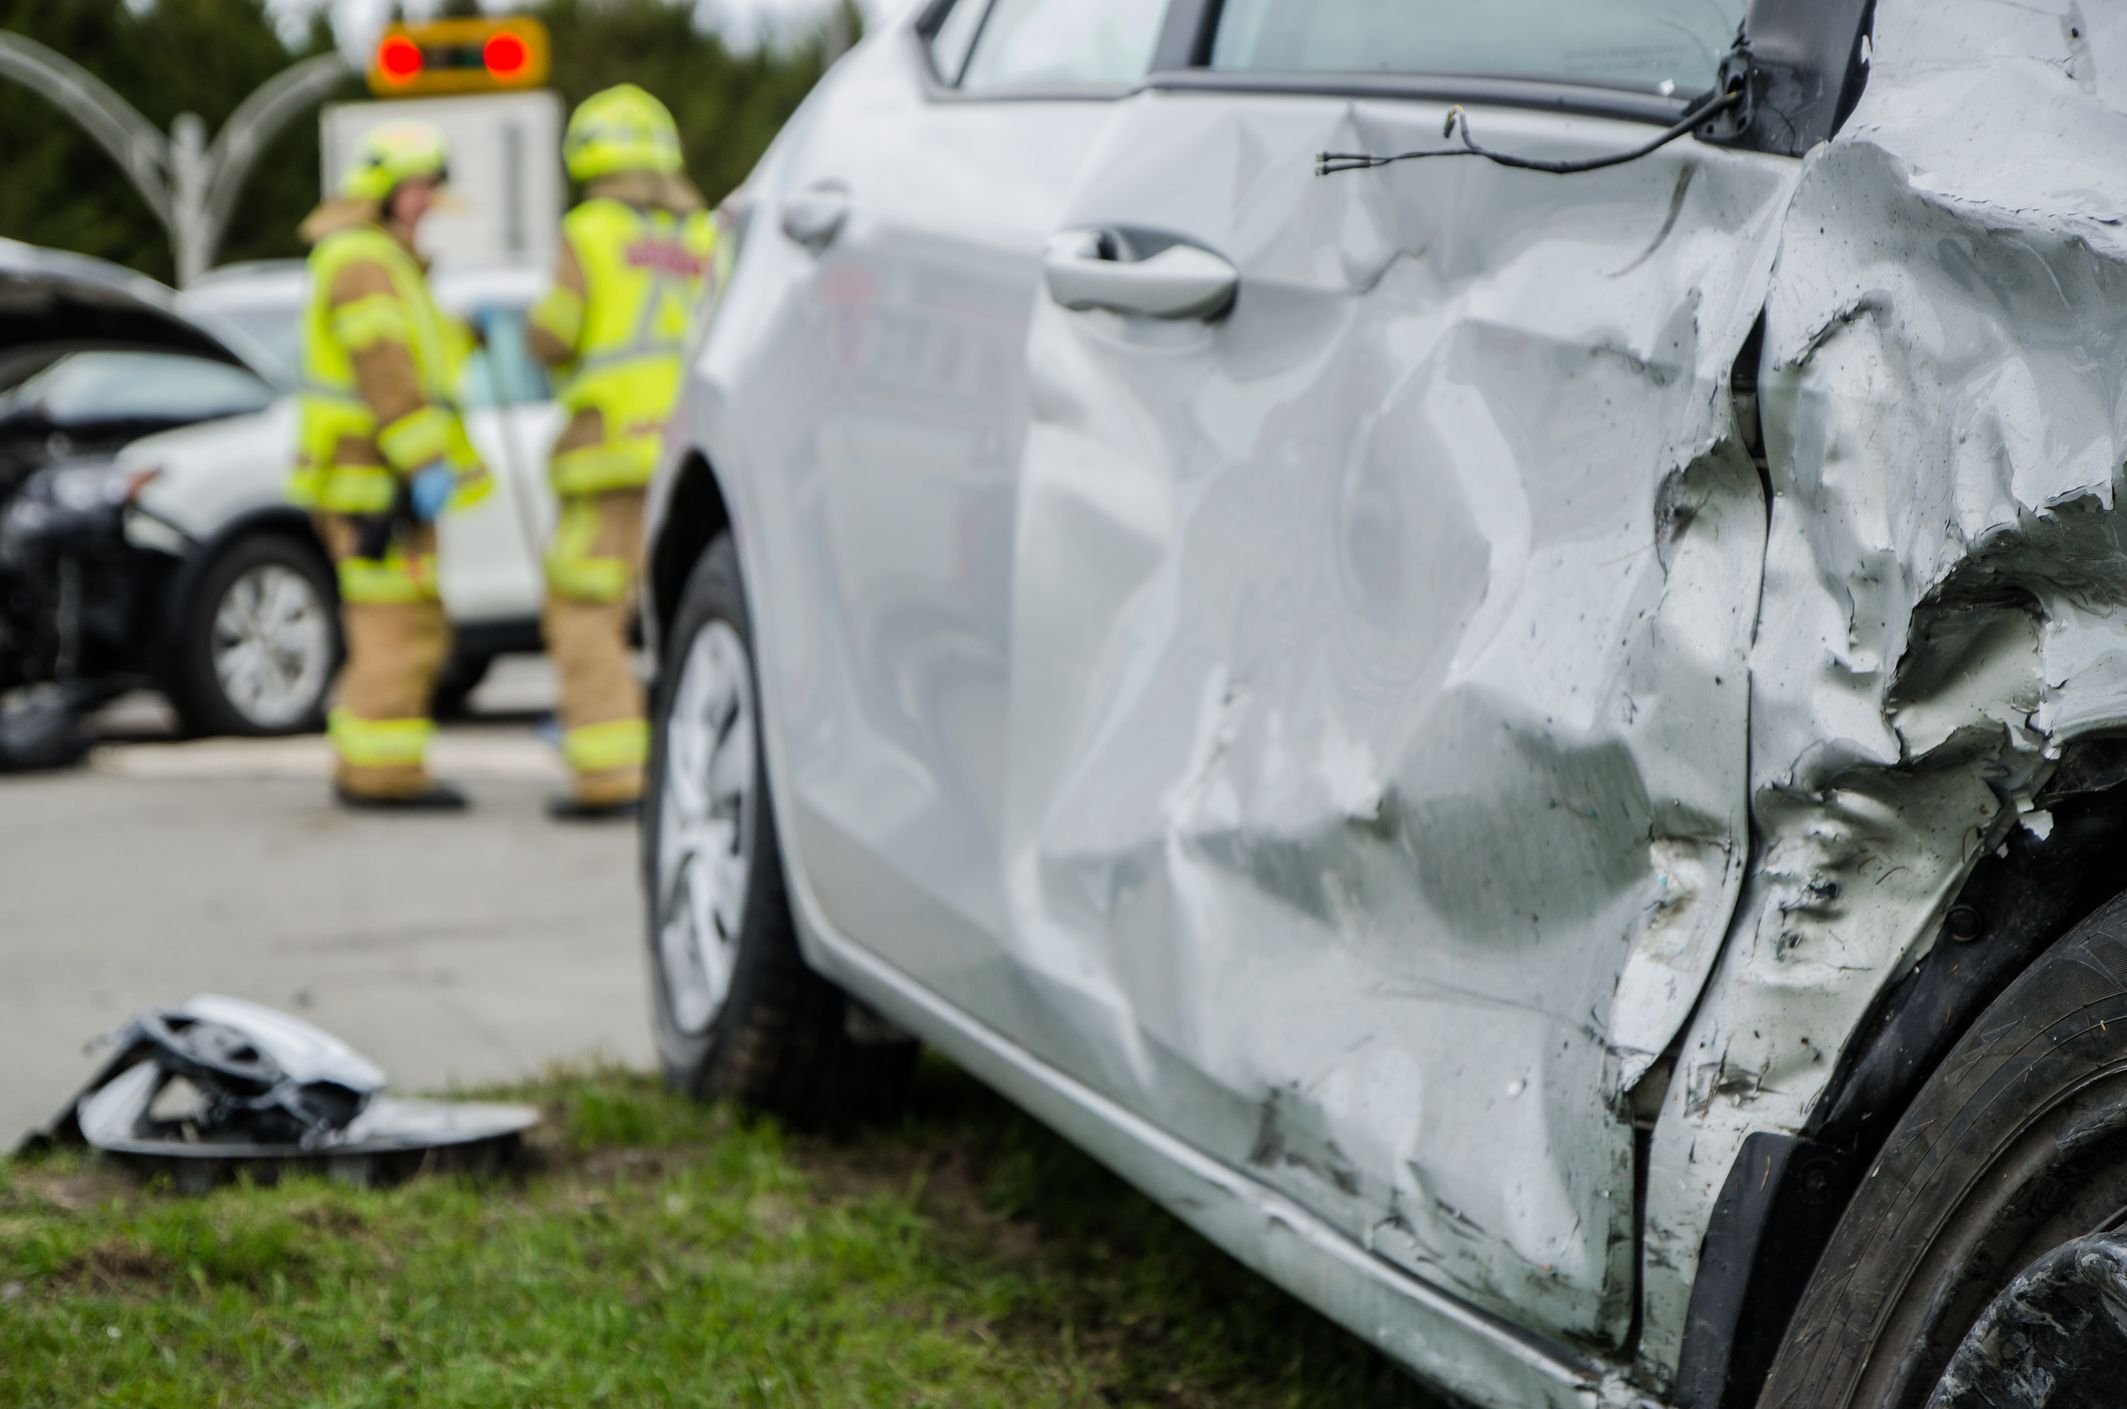 How Many Accidents Can You Have Before Your Insurance Drops You?